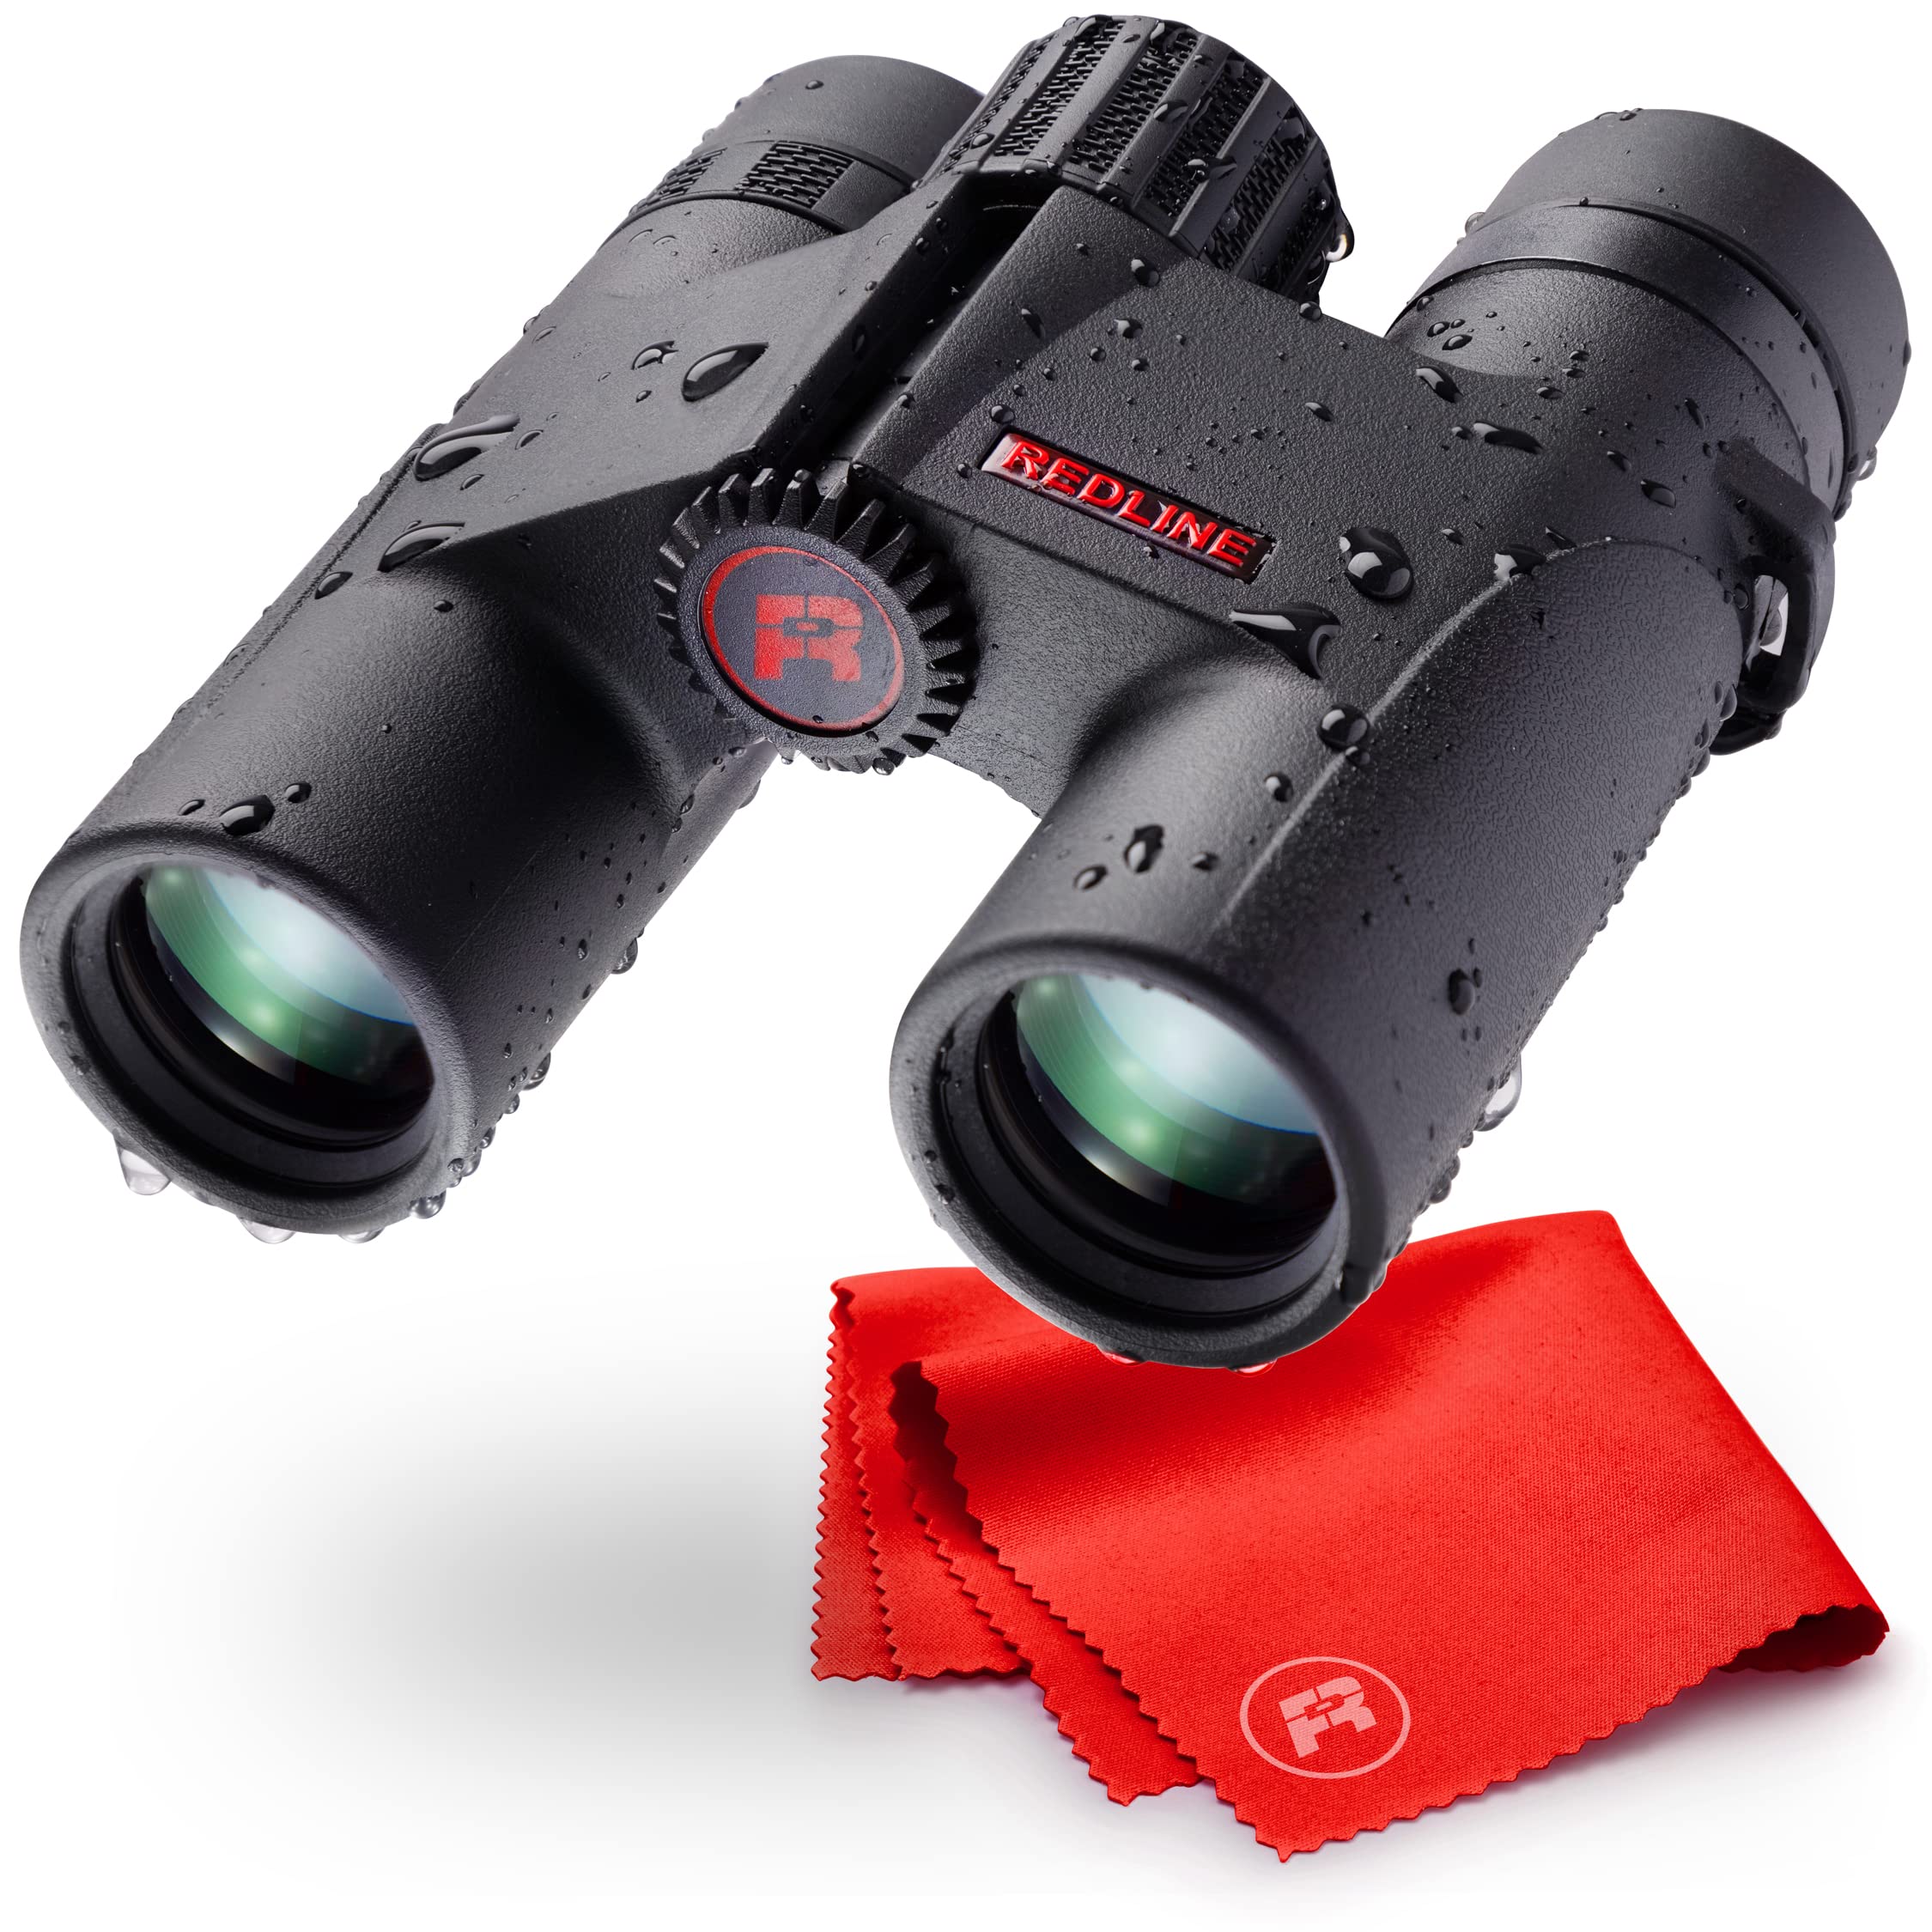 Red-Line Optics F4F Wildcat 8x25, 7 Prism Binoculars for Hunting, Bird Watching, Boating and Other Field Work, Based in Washington State